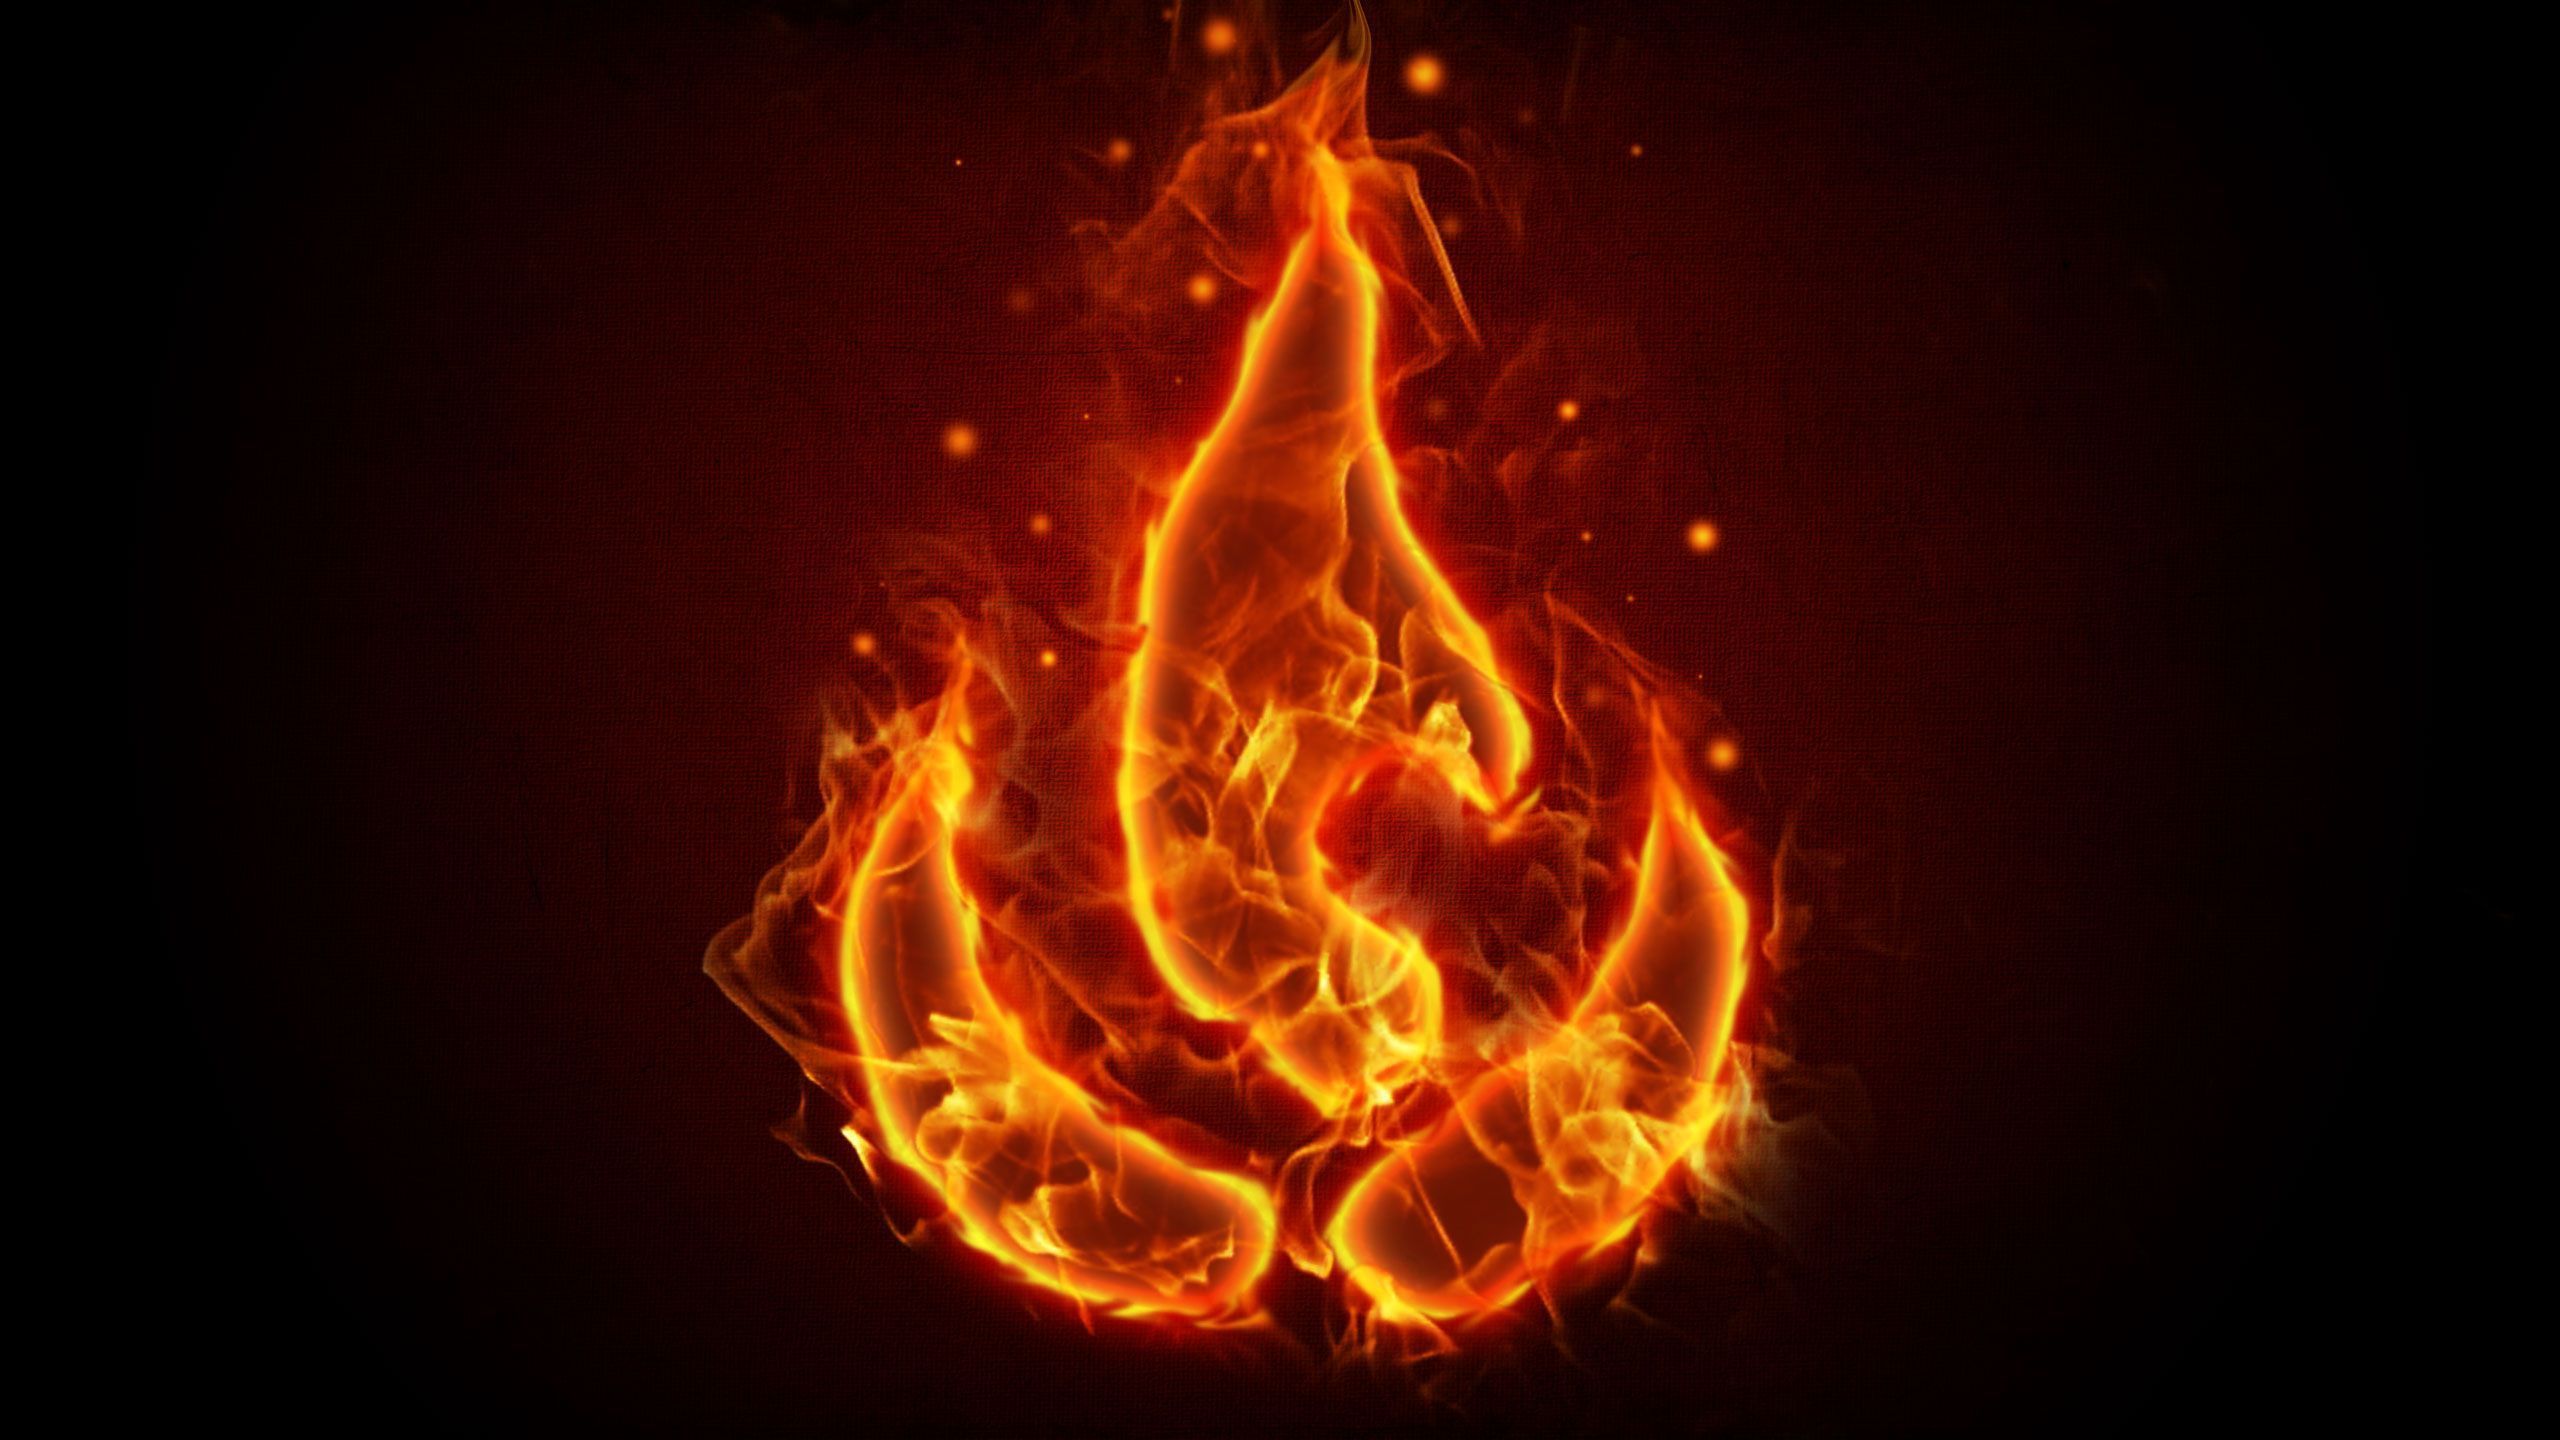 Gallery for - flame wallpaper